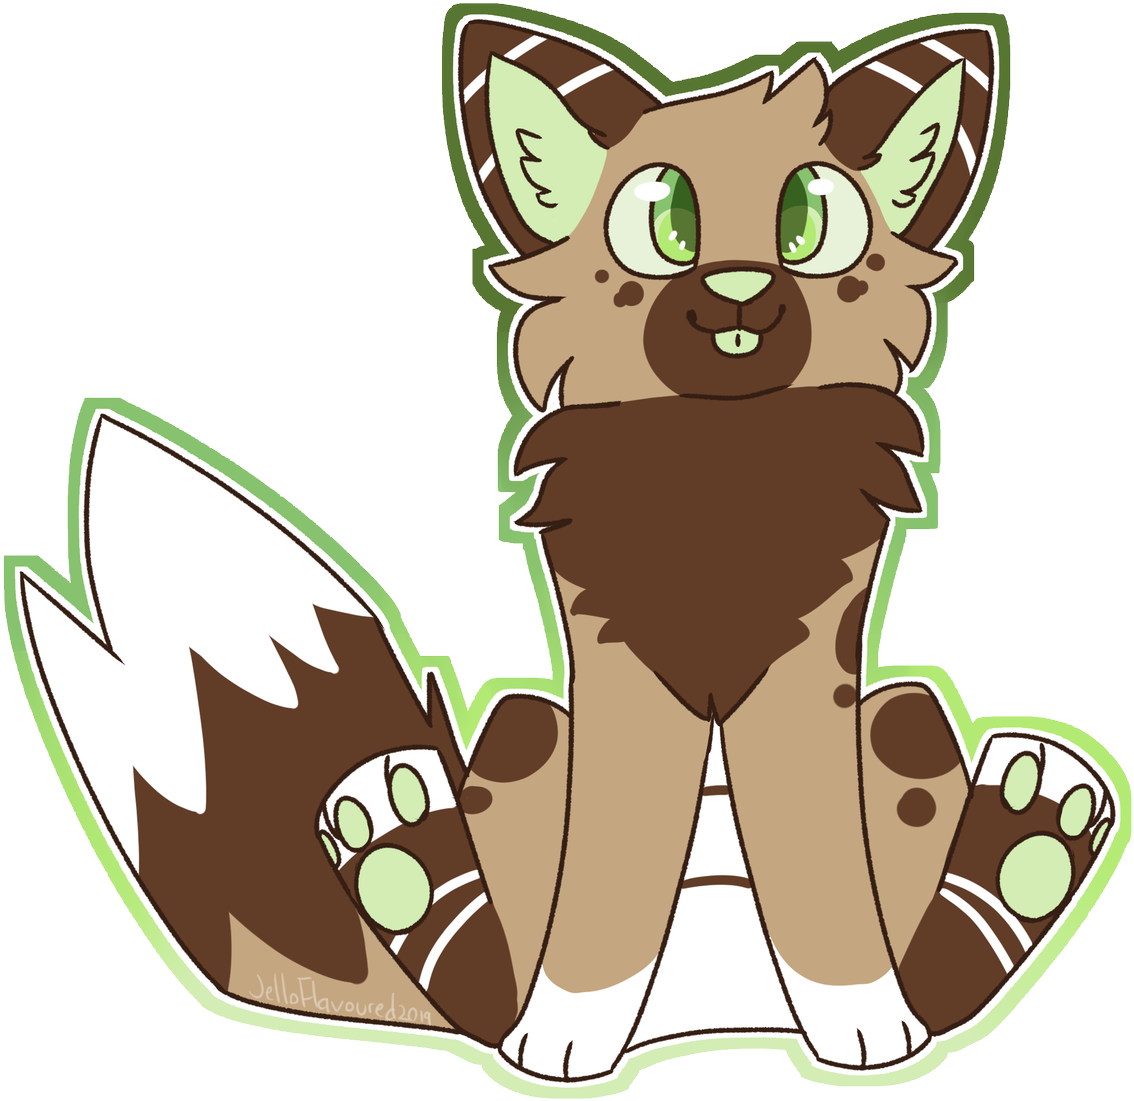 Briefly Opening 5 Slots Of $5 Chibi-like Sticker Commissions - Cat Yawns (1194x1200)